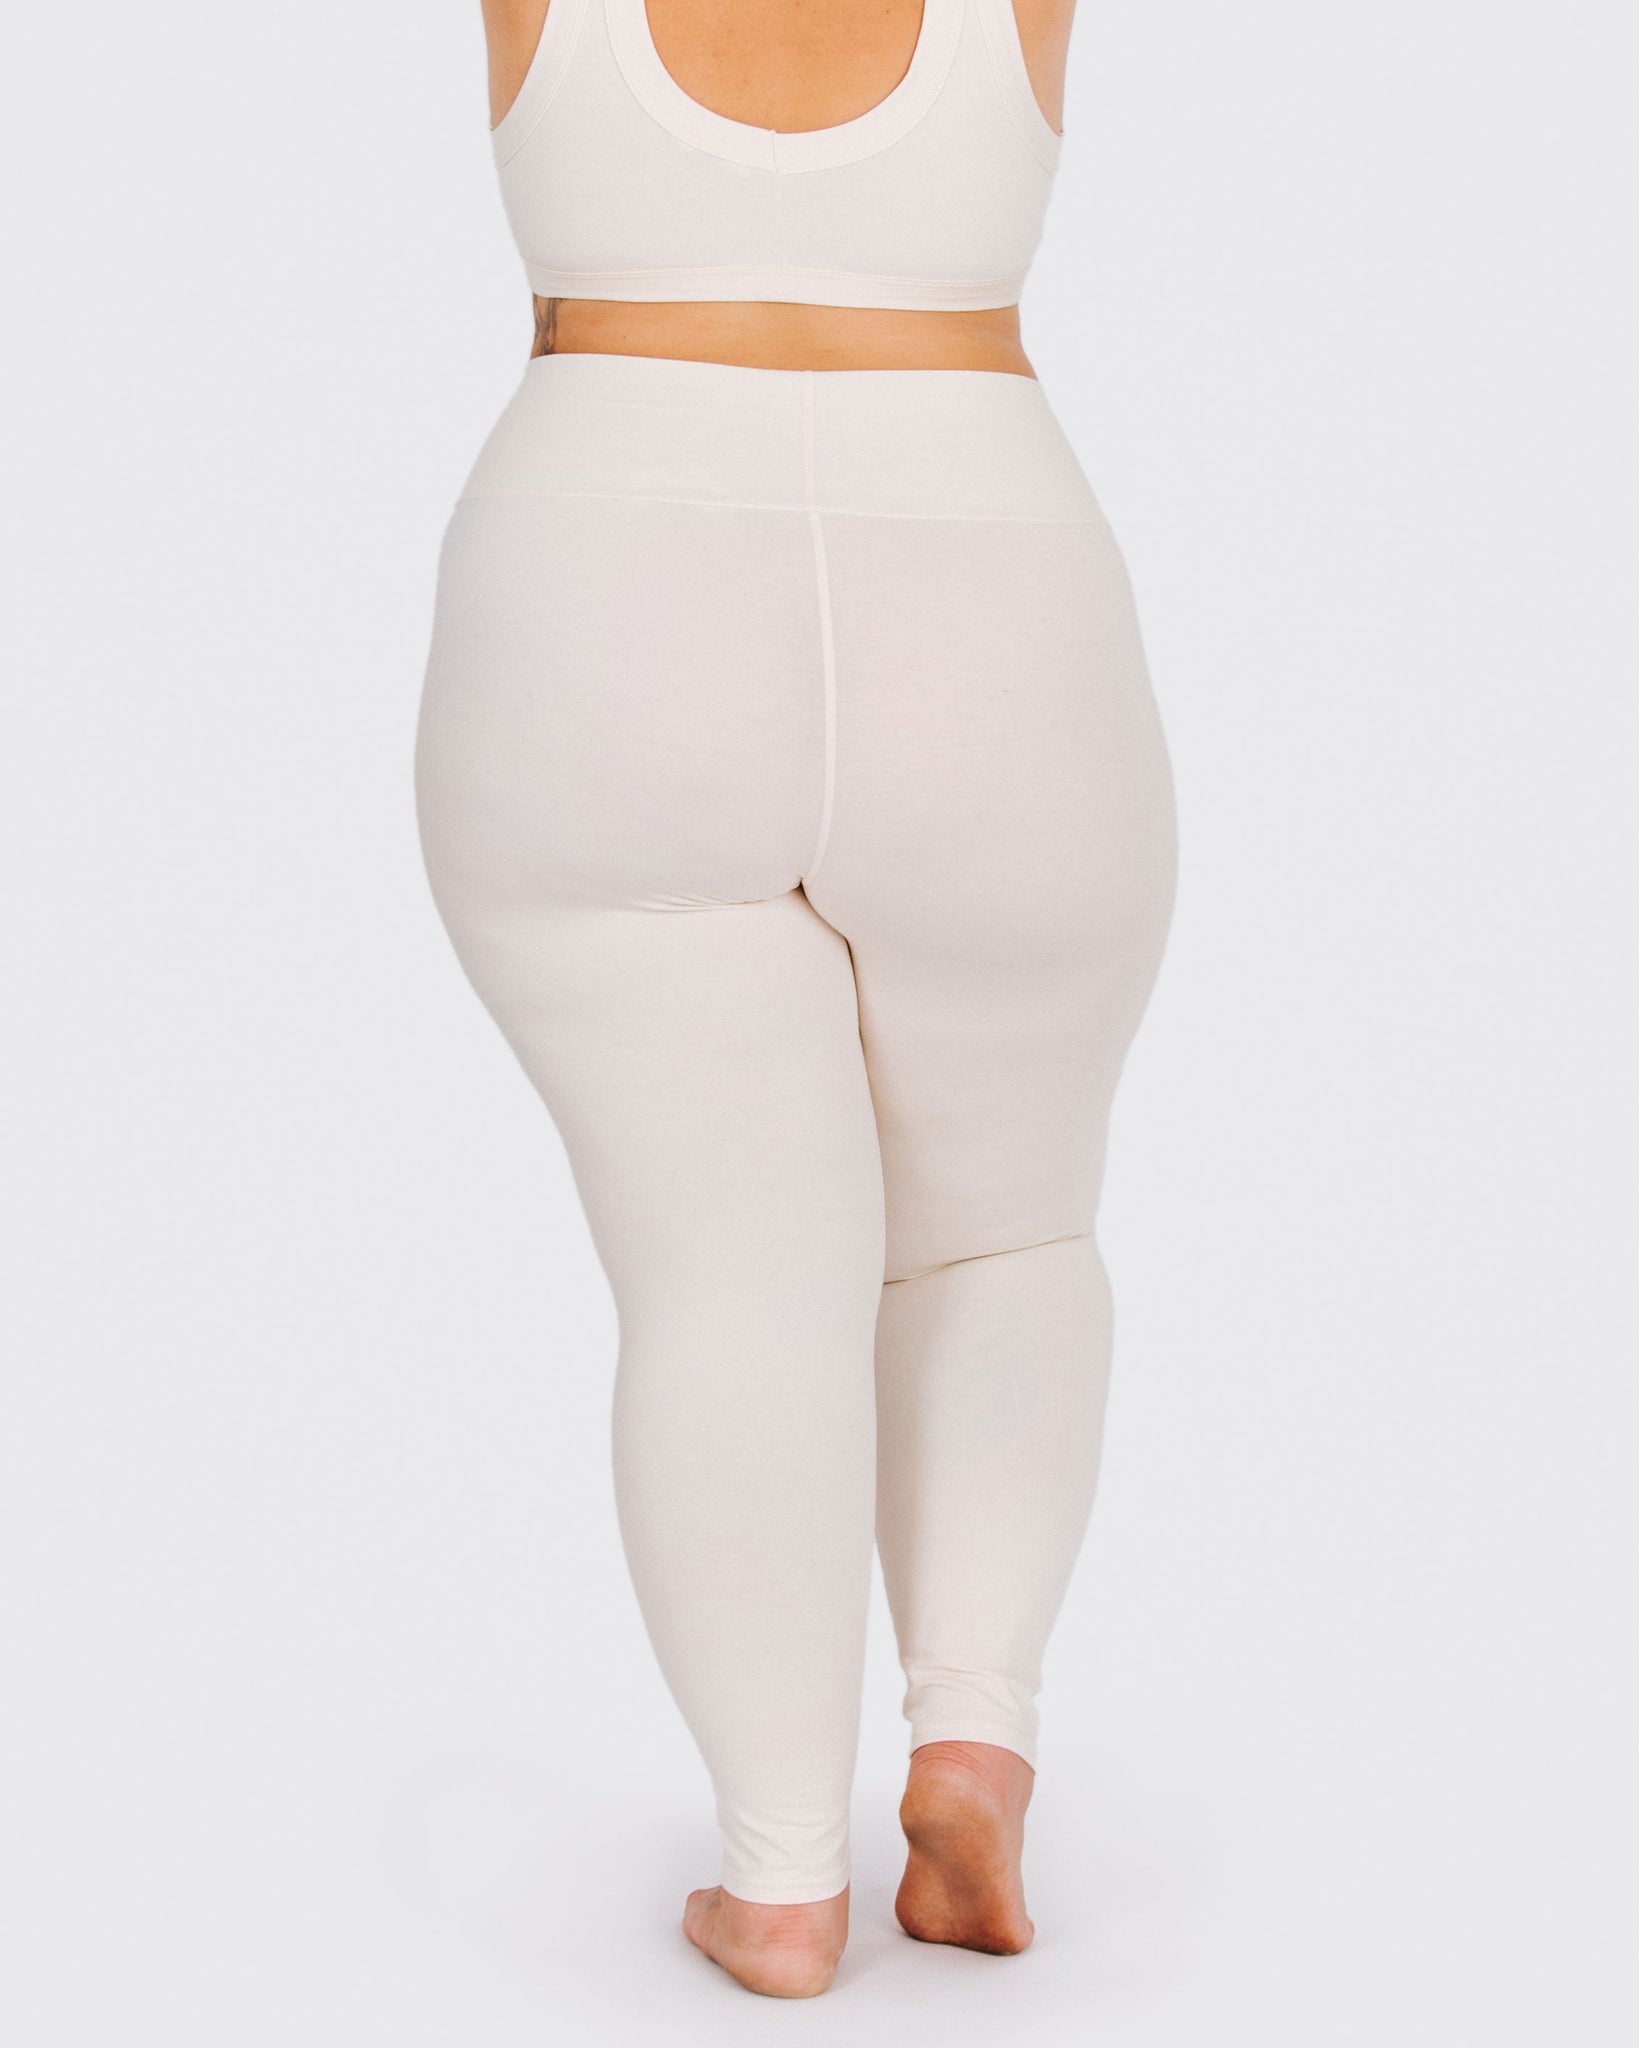 Buy Saundarya Ankle Length Leggings for Women Pack of 1 2 3 and 5 Sizes:  S/M (Small Size) for 26-30 inches Waist, L/XL (Regular Size) for 30-36  inches Waist and 2XL/3XL (Plus